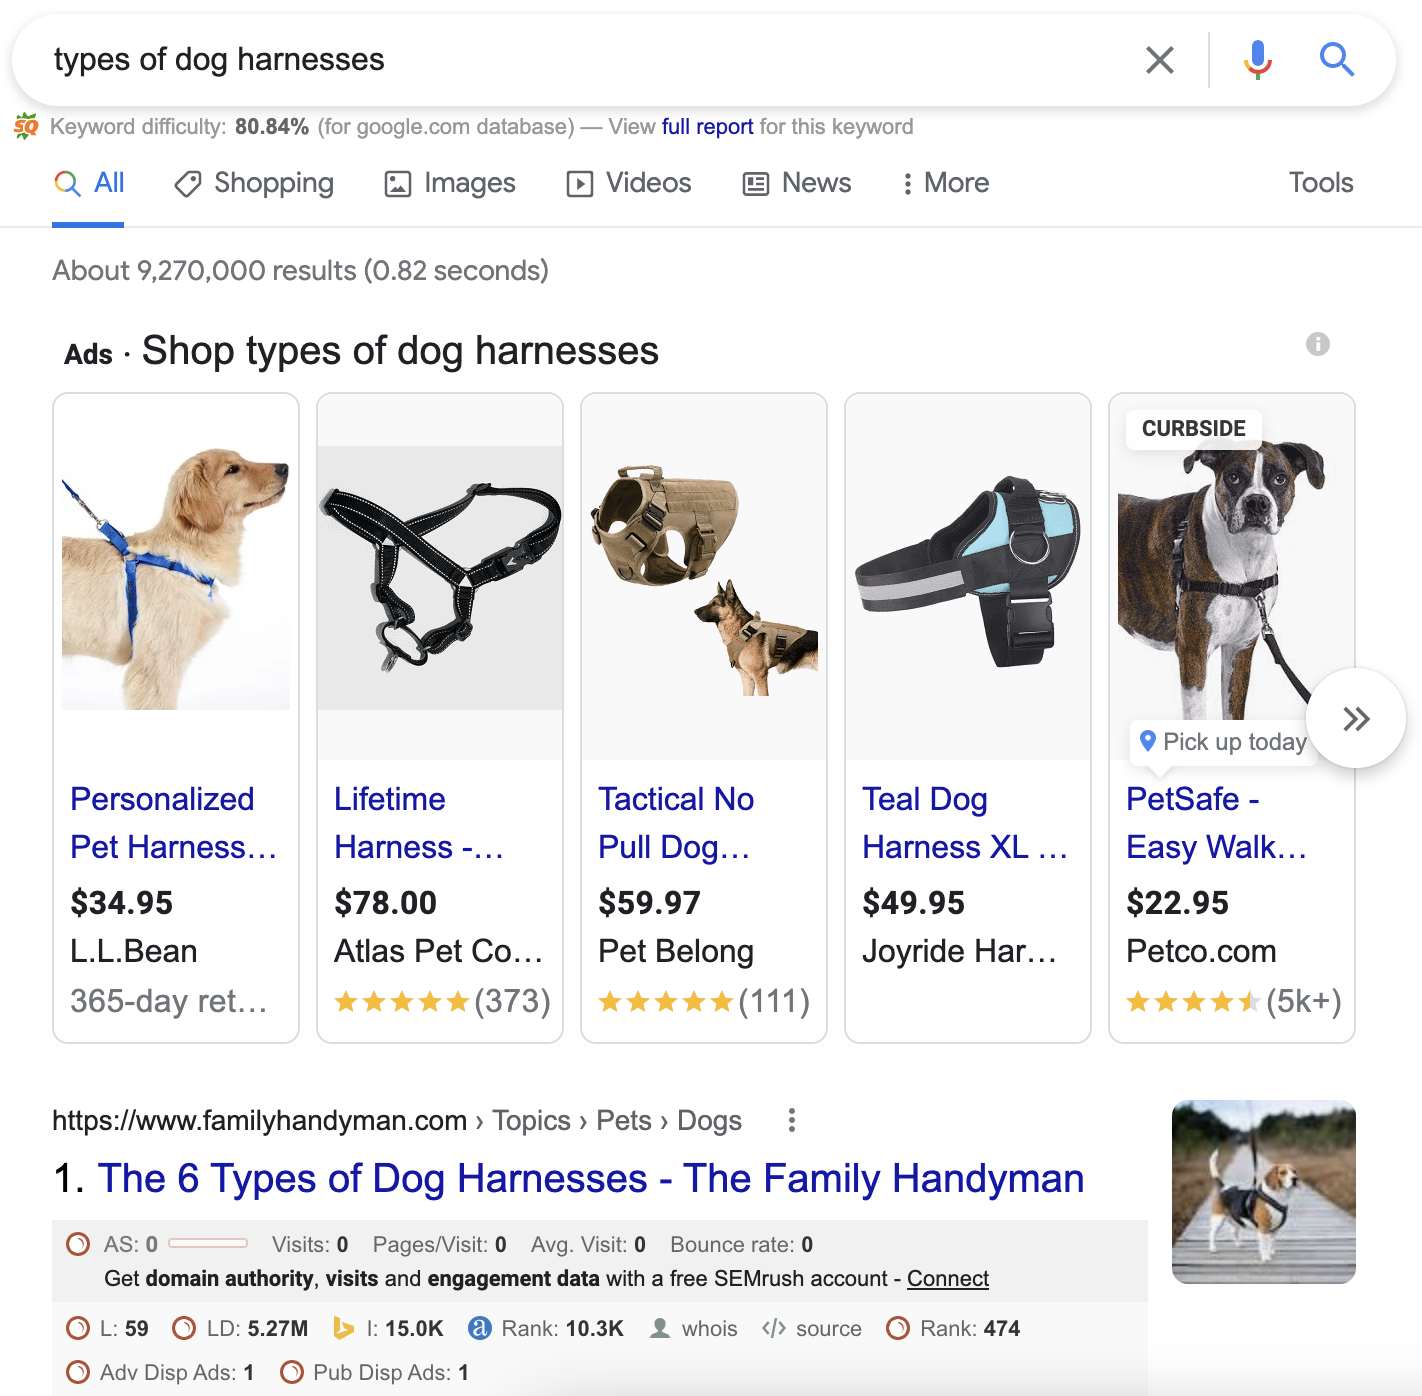 Types of dog harnesses